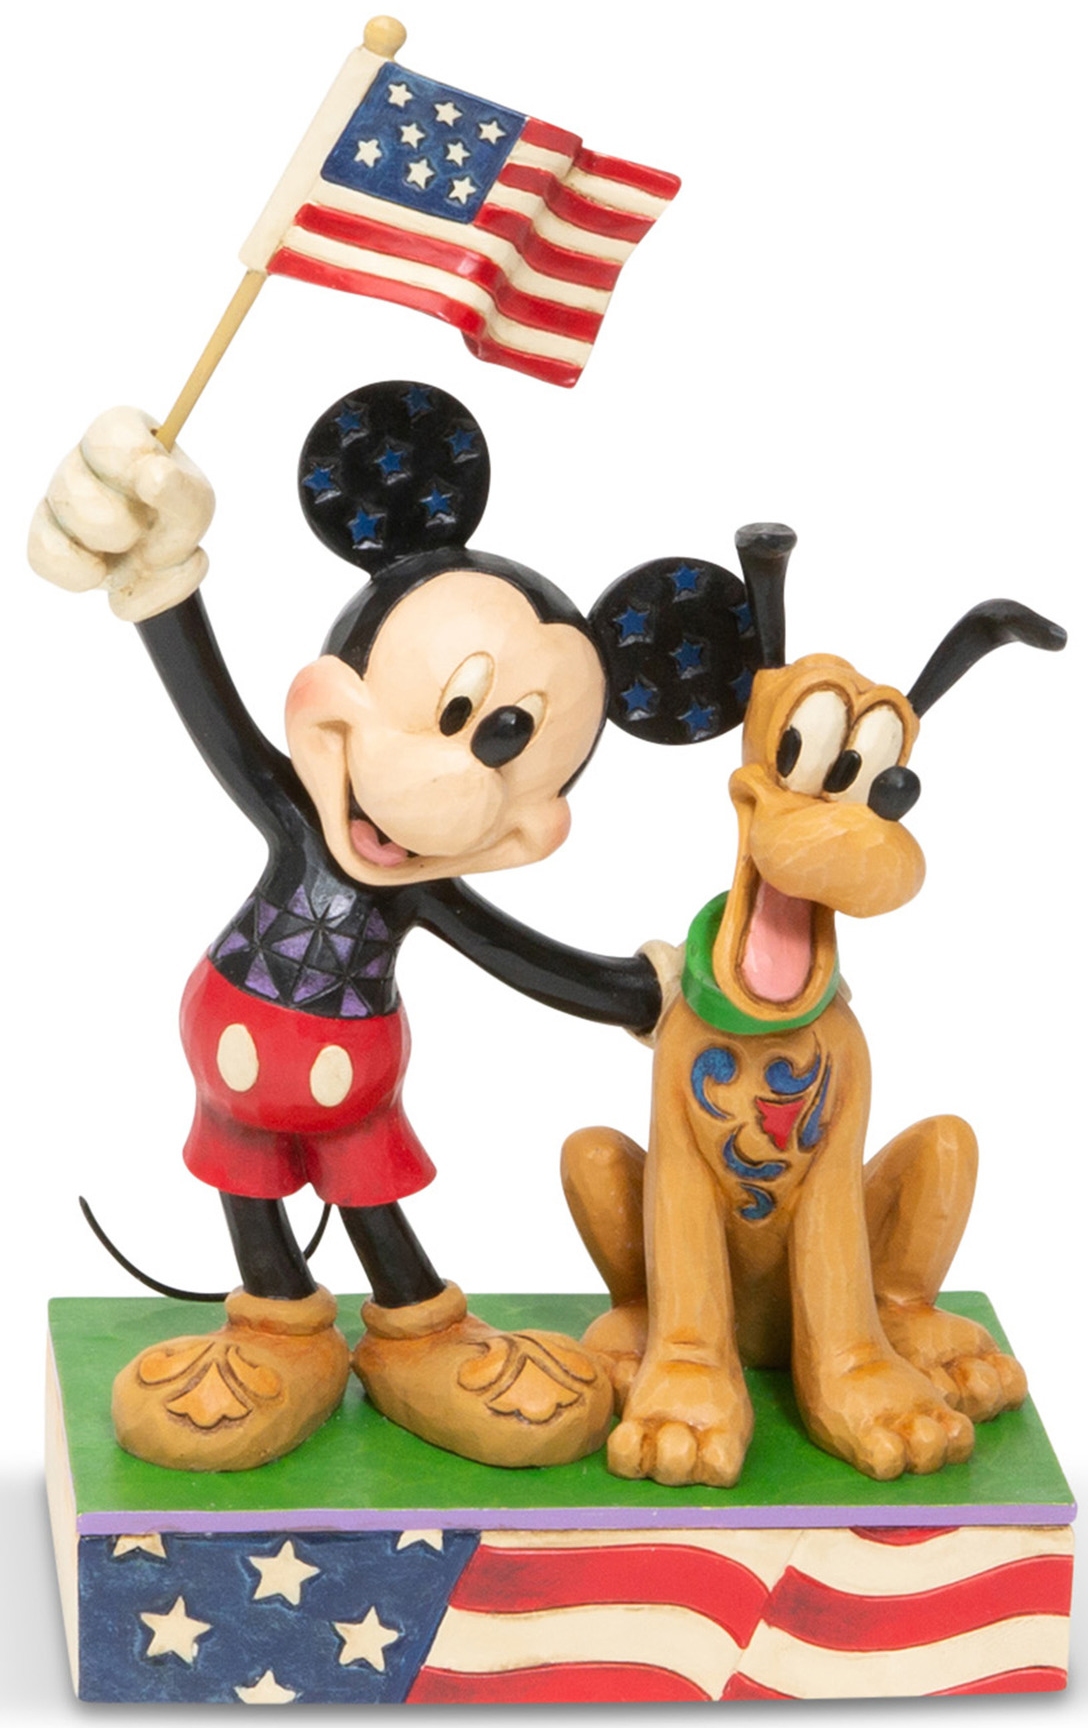 Disney Traditions by Jim Shore 6005975 Mickey and Pluto Patriot Figurine